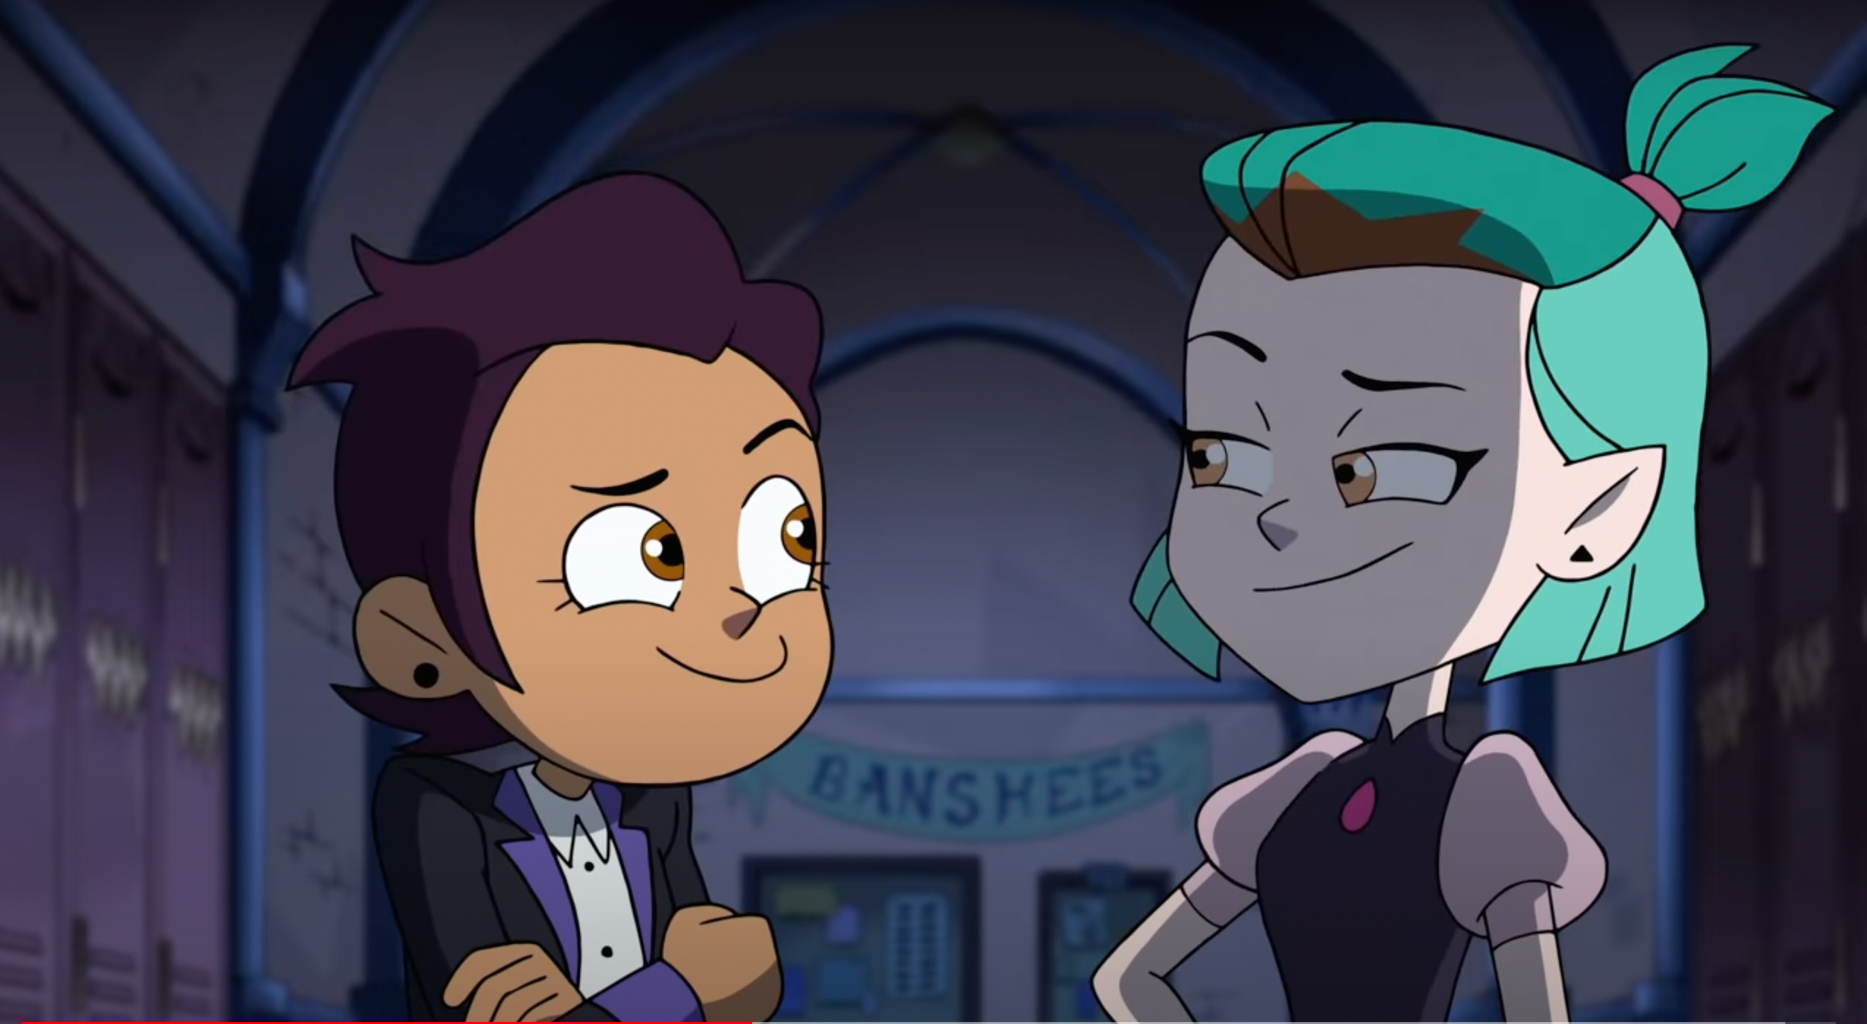 Screenshot of Luz and Amity from The Owl House animated show